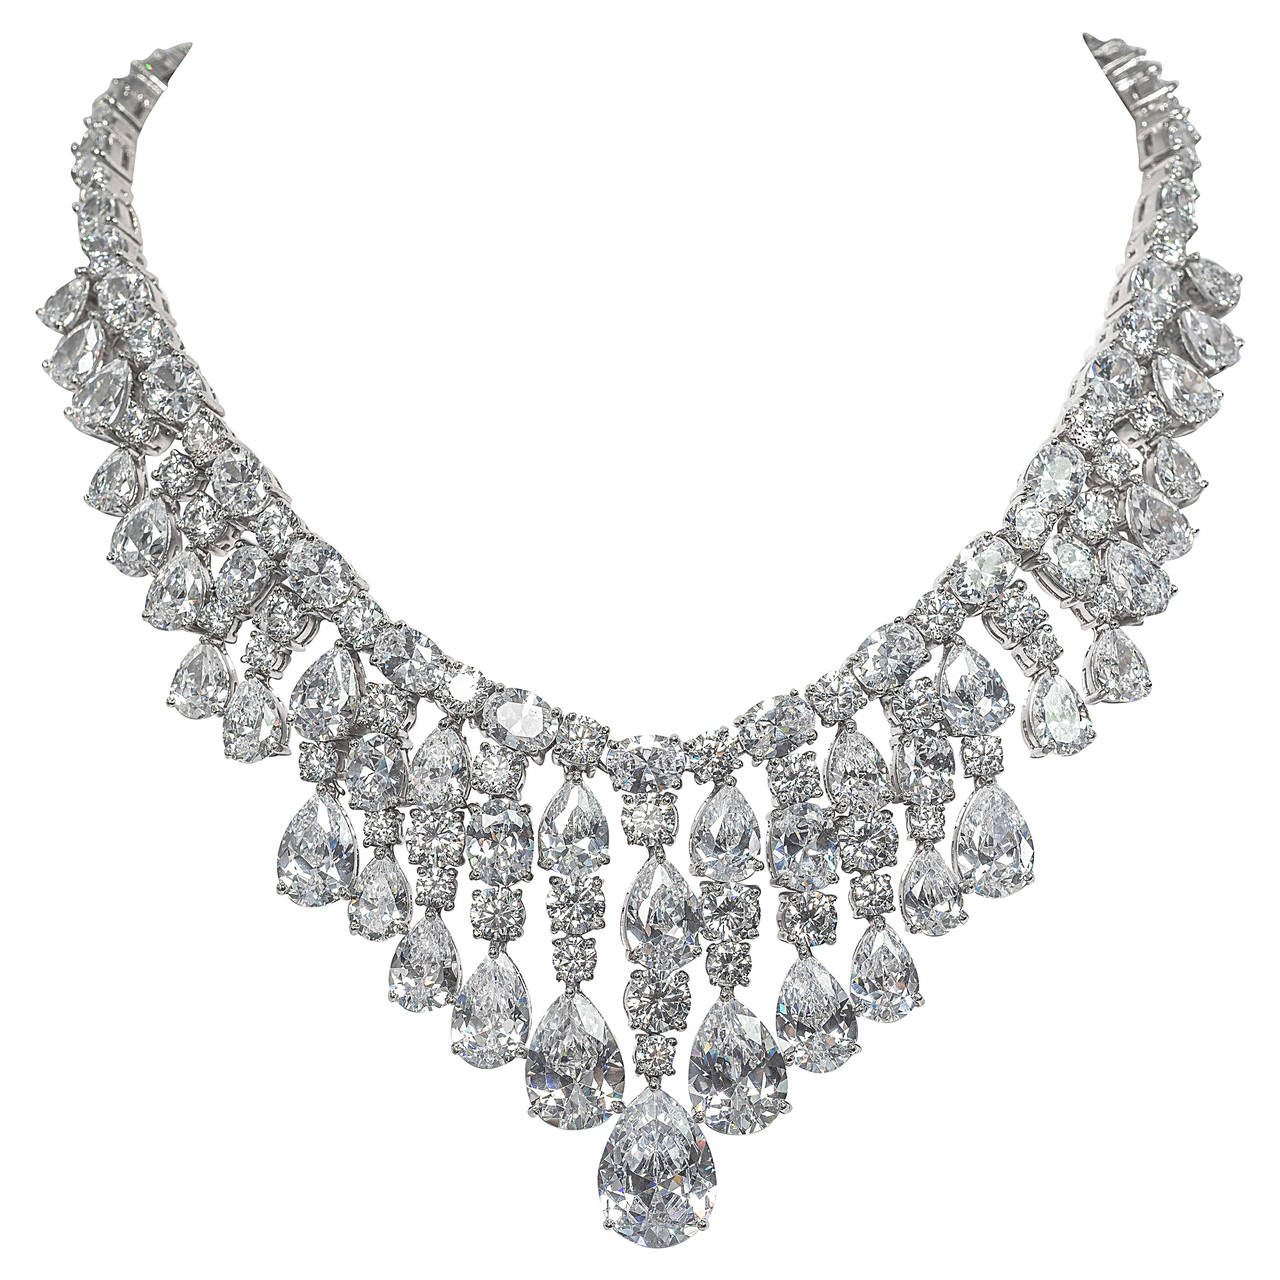 Fake Diamond Necklace
 Red Carpet Faux Diamond Draperie Necklace For Sale at 1stdibs